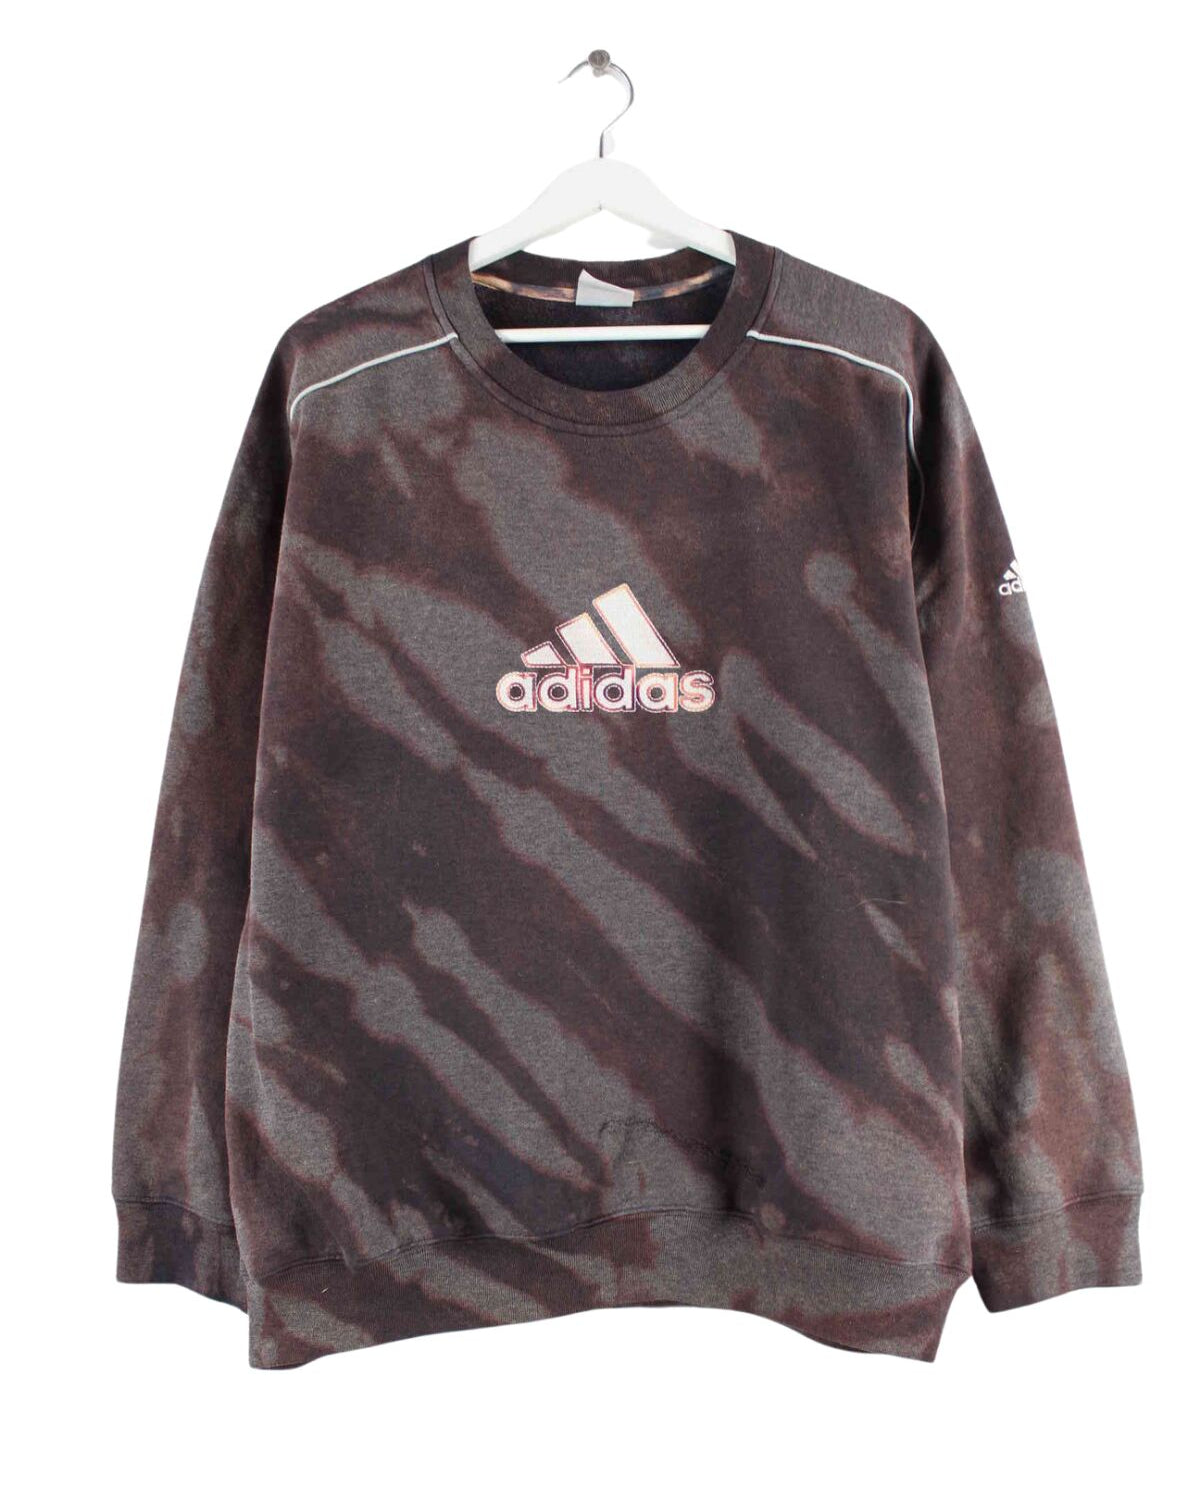 Adidas y2k Embroidered Tie Dye Sweater Braun L (front image)